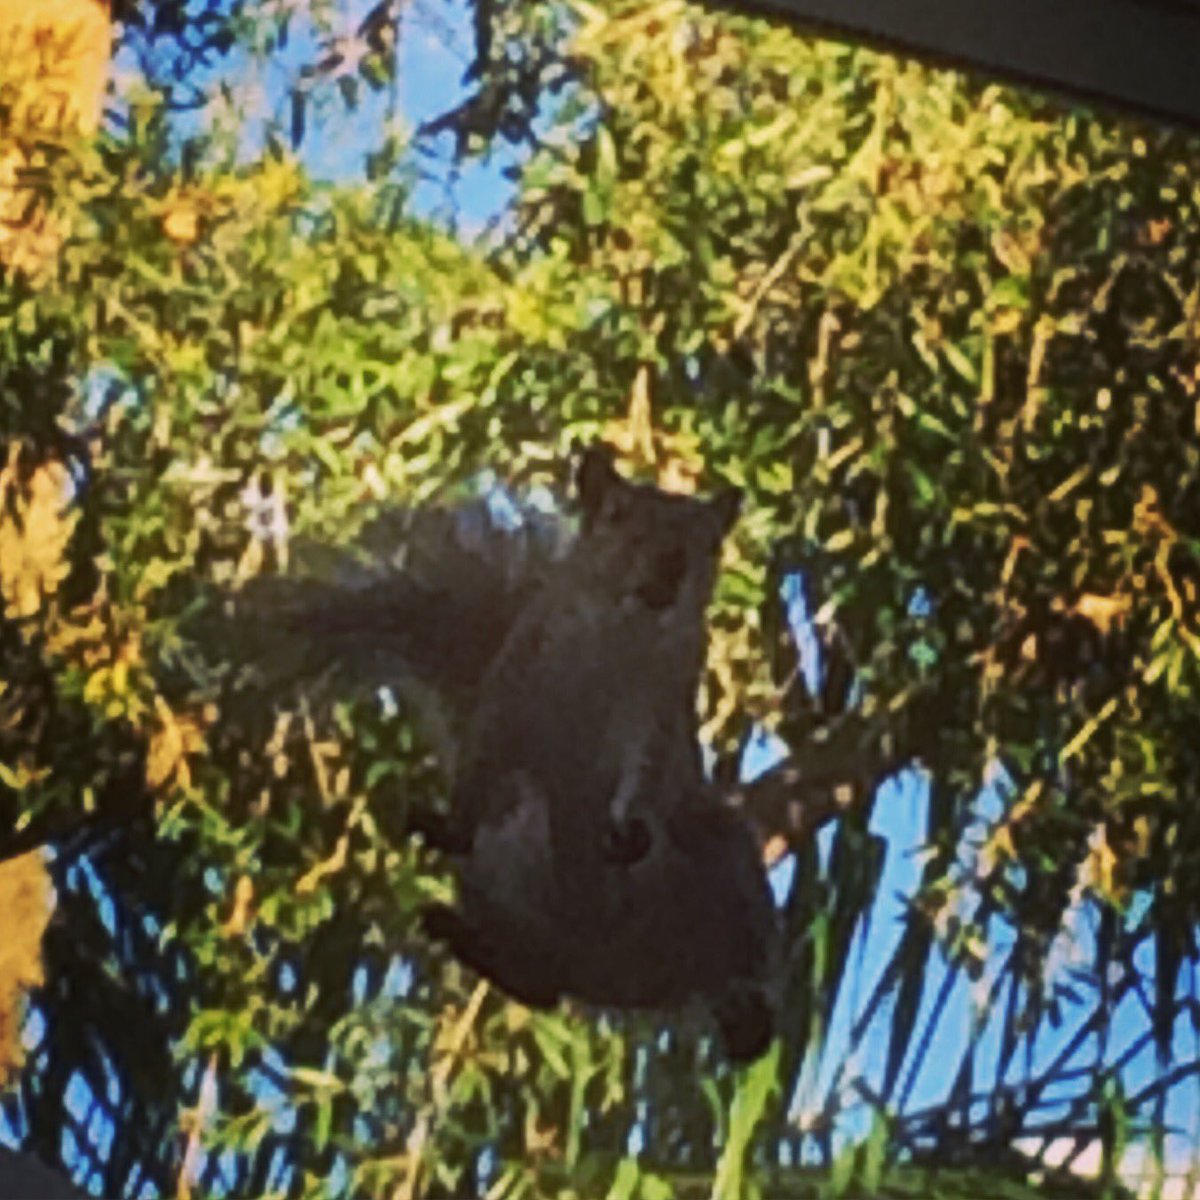 Today's #squirrel #squirrelsgonewild #searching for a #nut